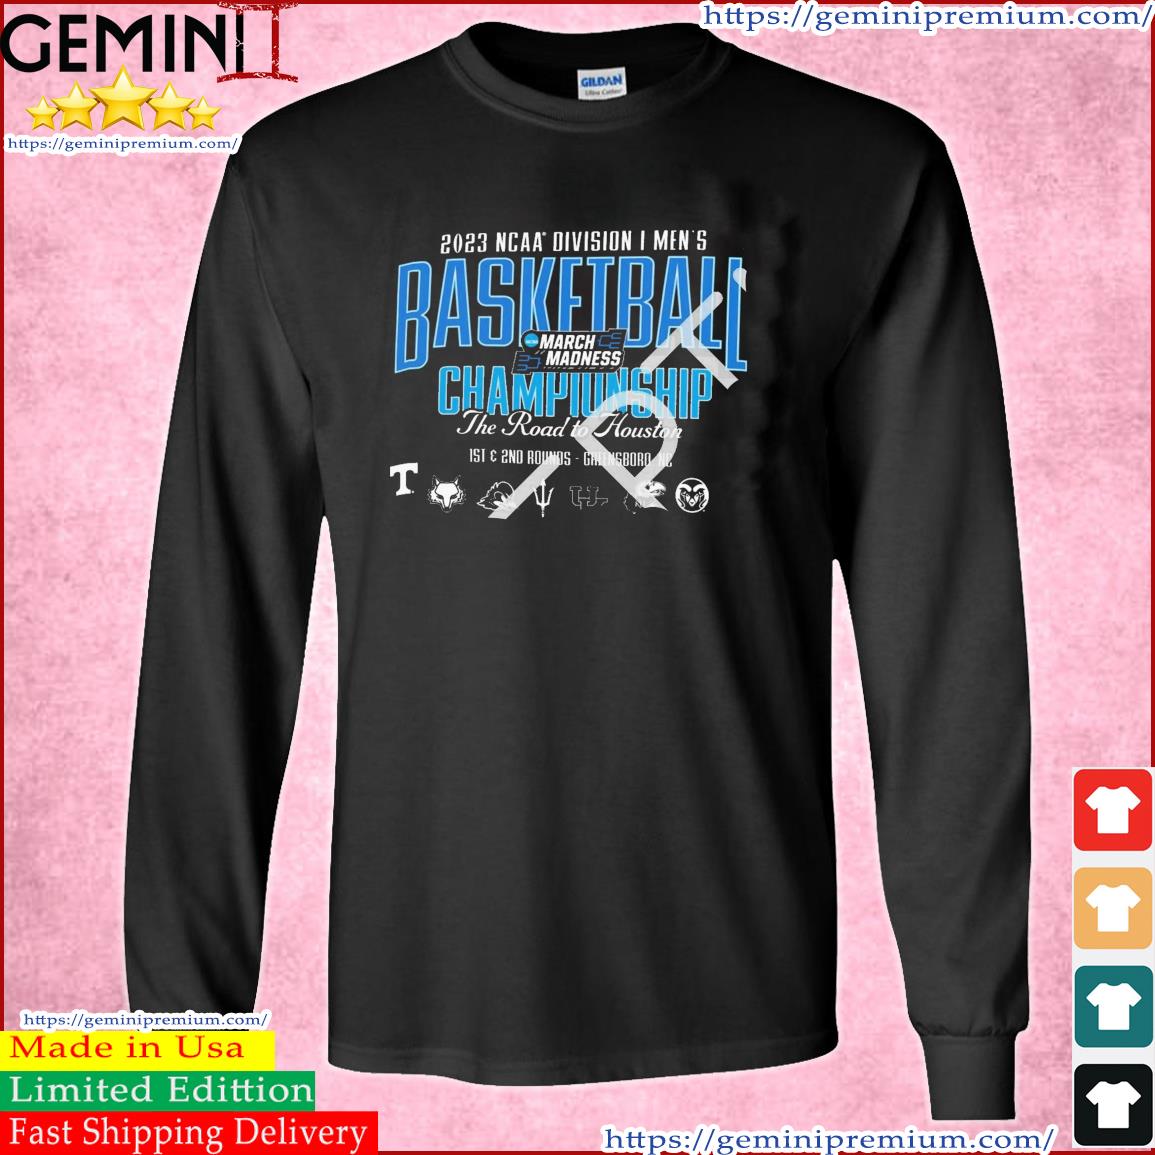 March Madness 2023 NCAA Division I Men's Basketball 1st & 2nd Rounds Greensboro Shirt Long Sleeve Tee